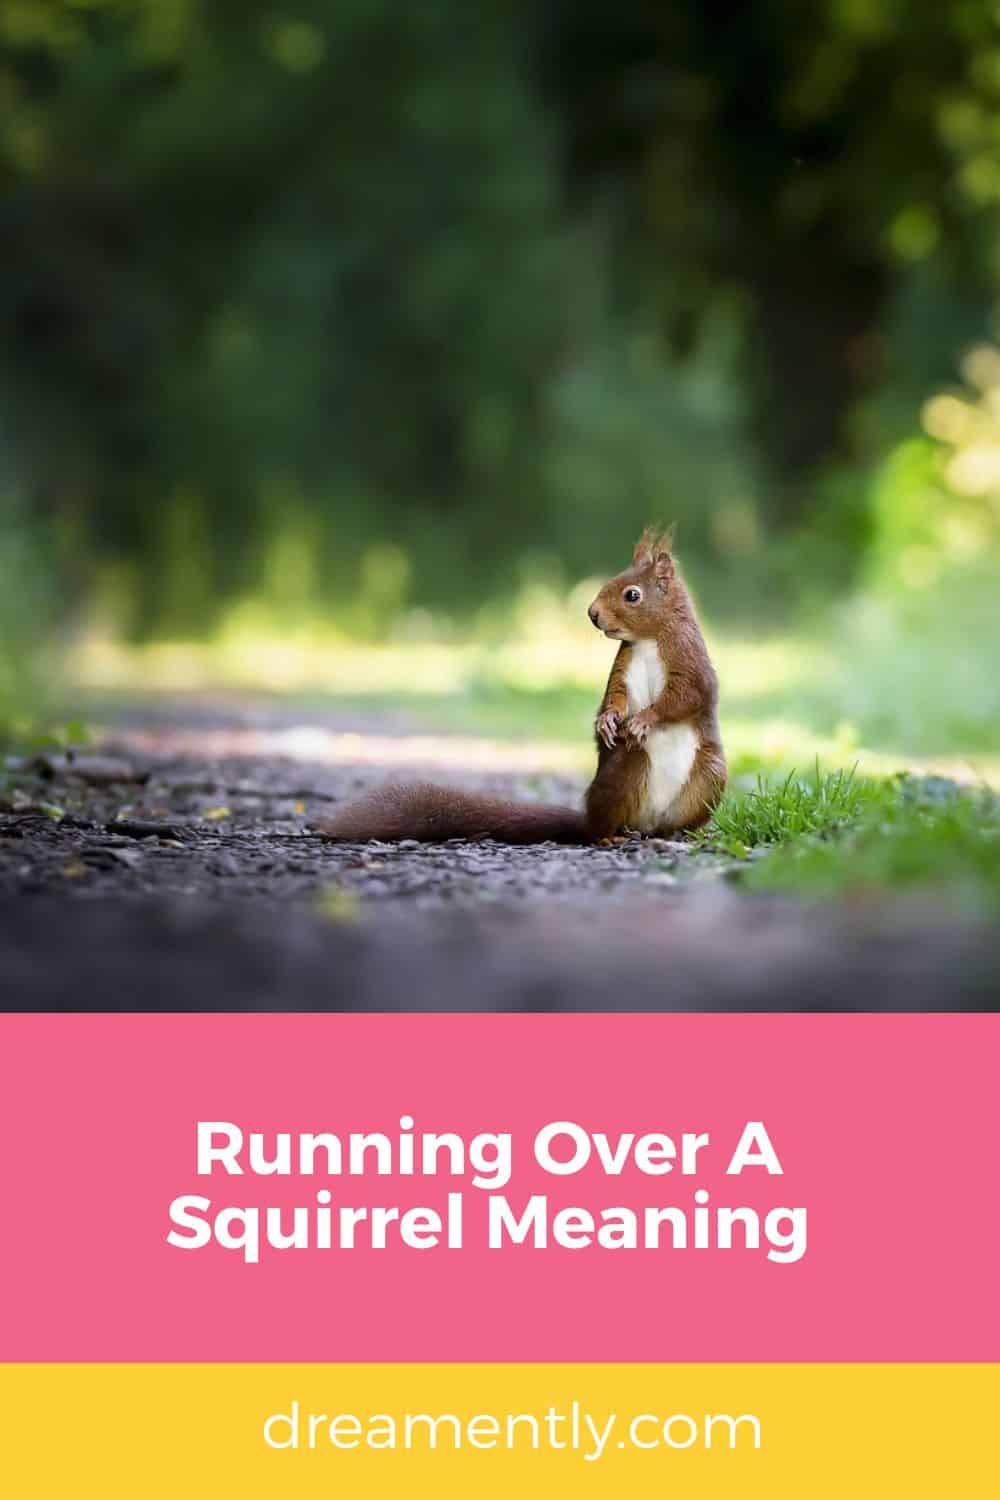 Running Over A Squirrel Meaning